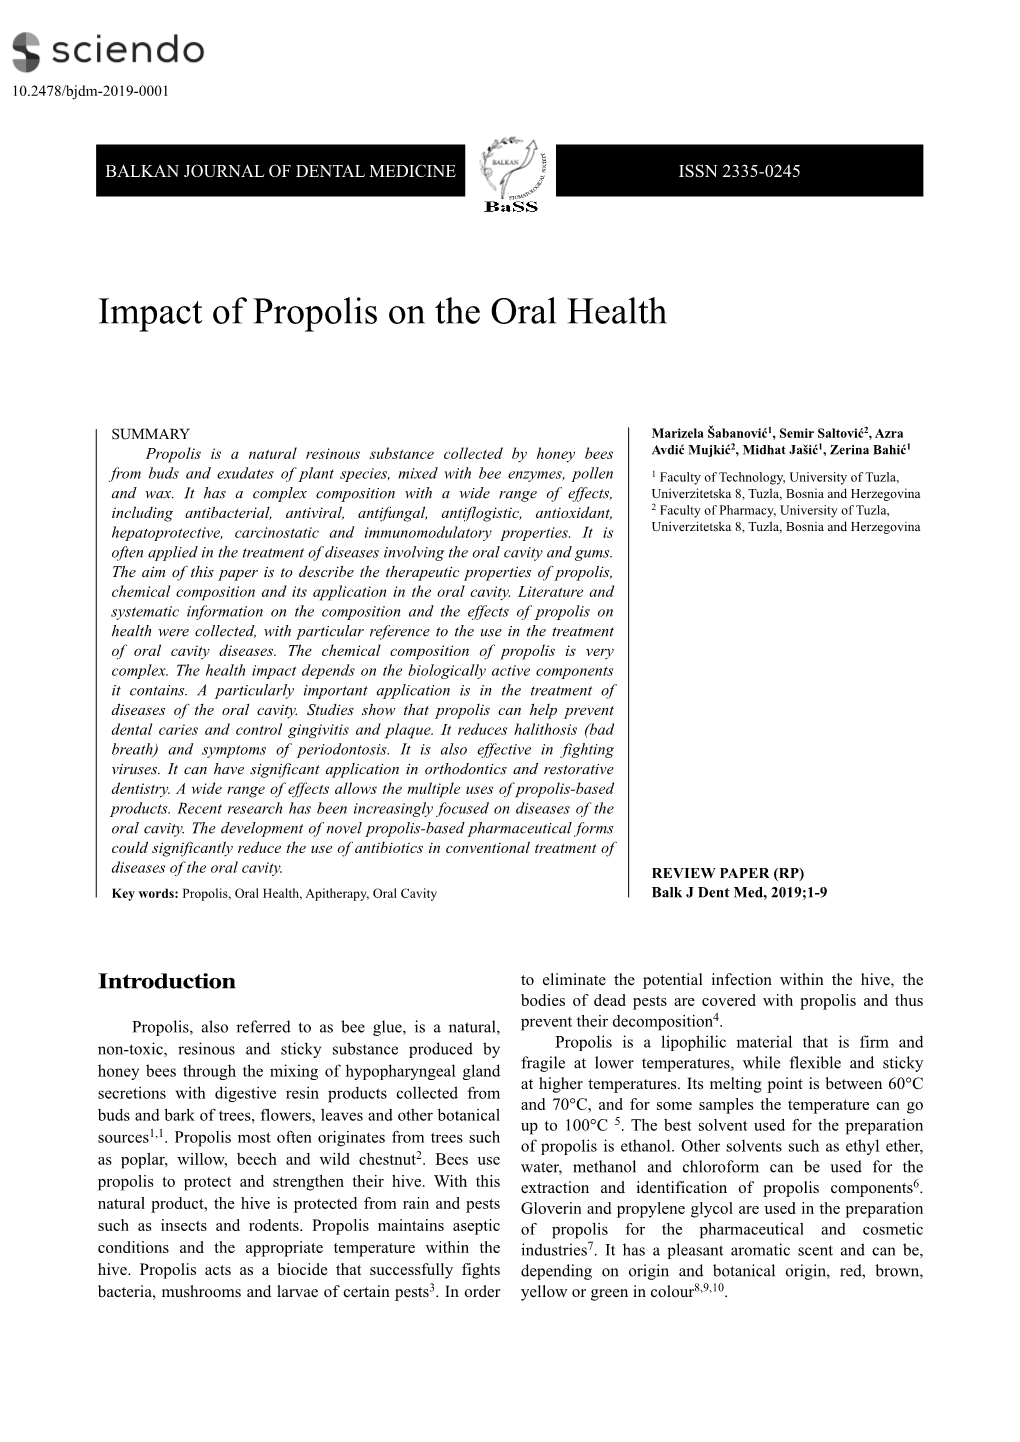 Impact of Propolis on the Oral Health